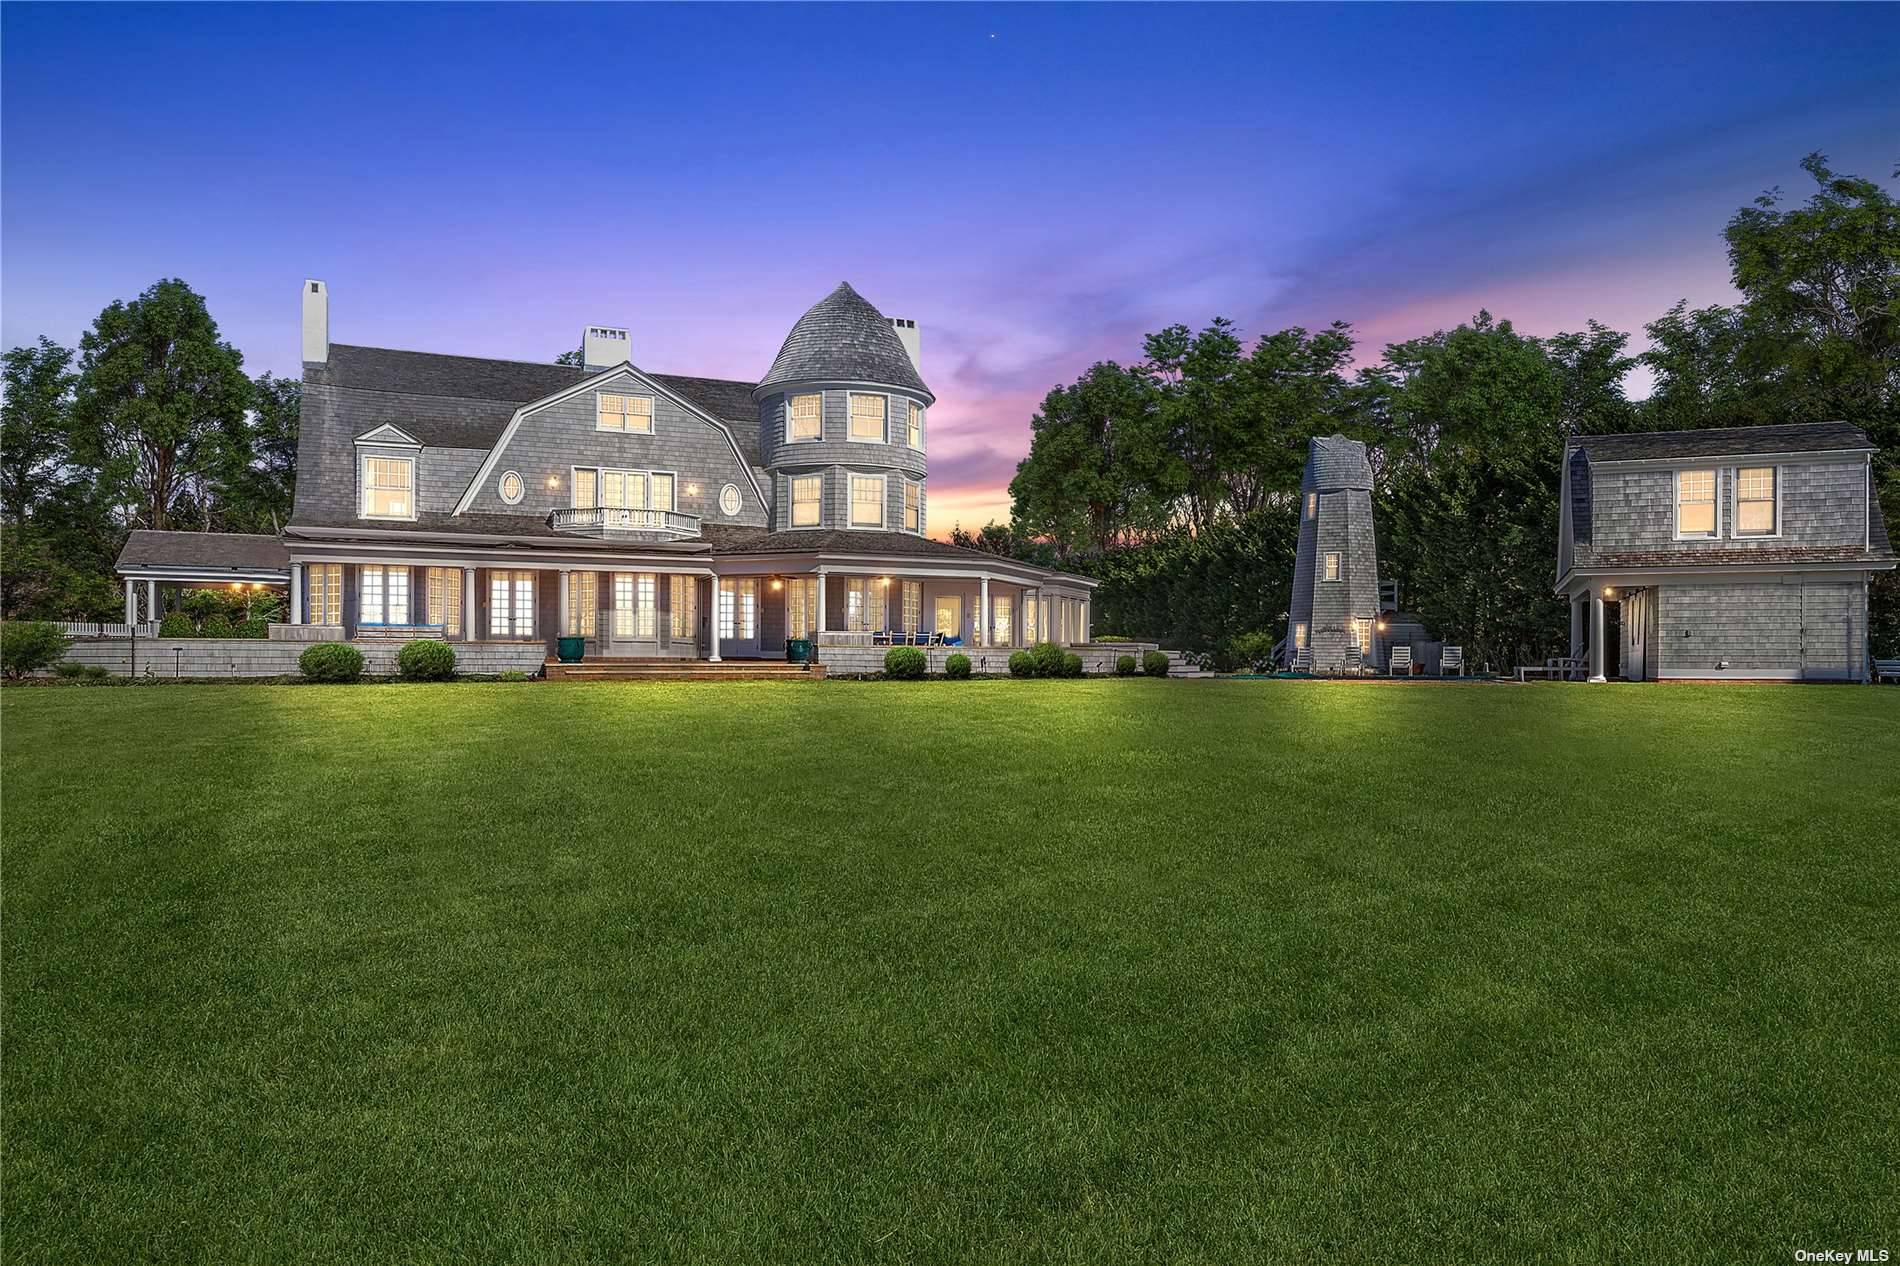 This majestic, one of a kind estate is set on 7 private, resort like acres south of Montauk Highway.